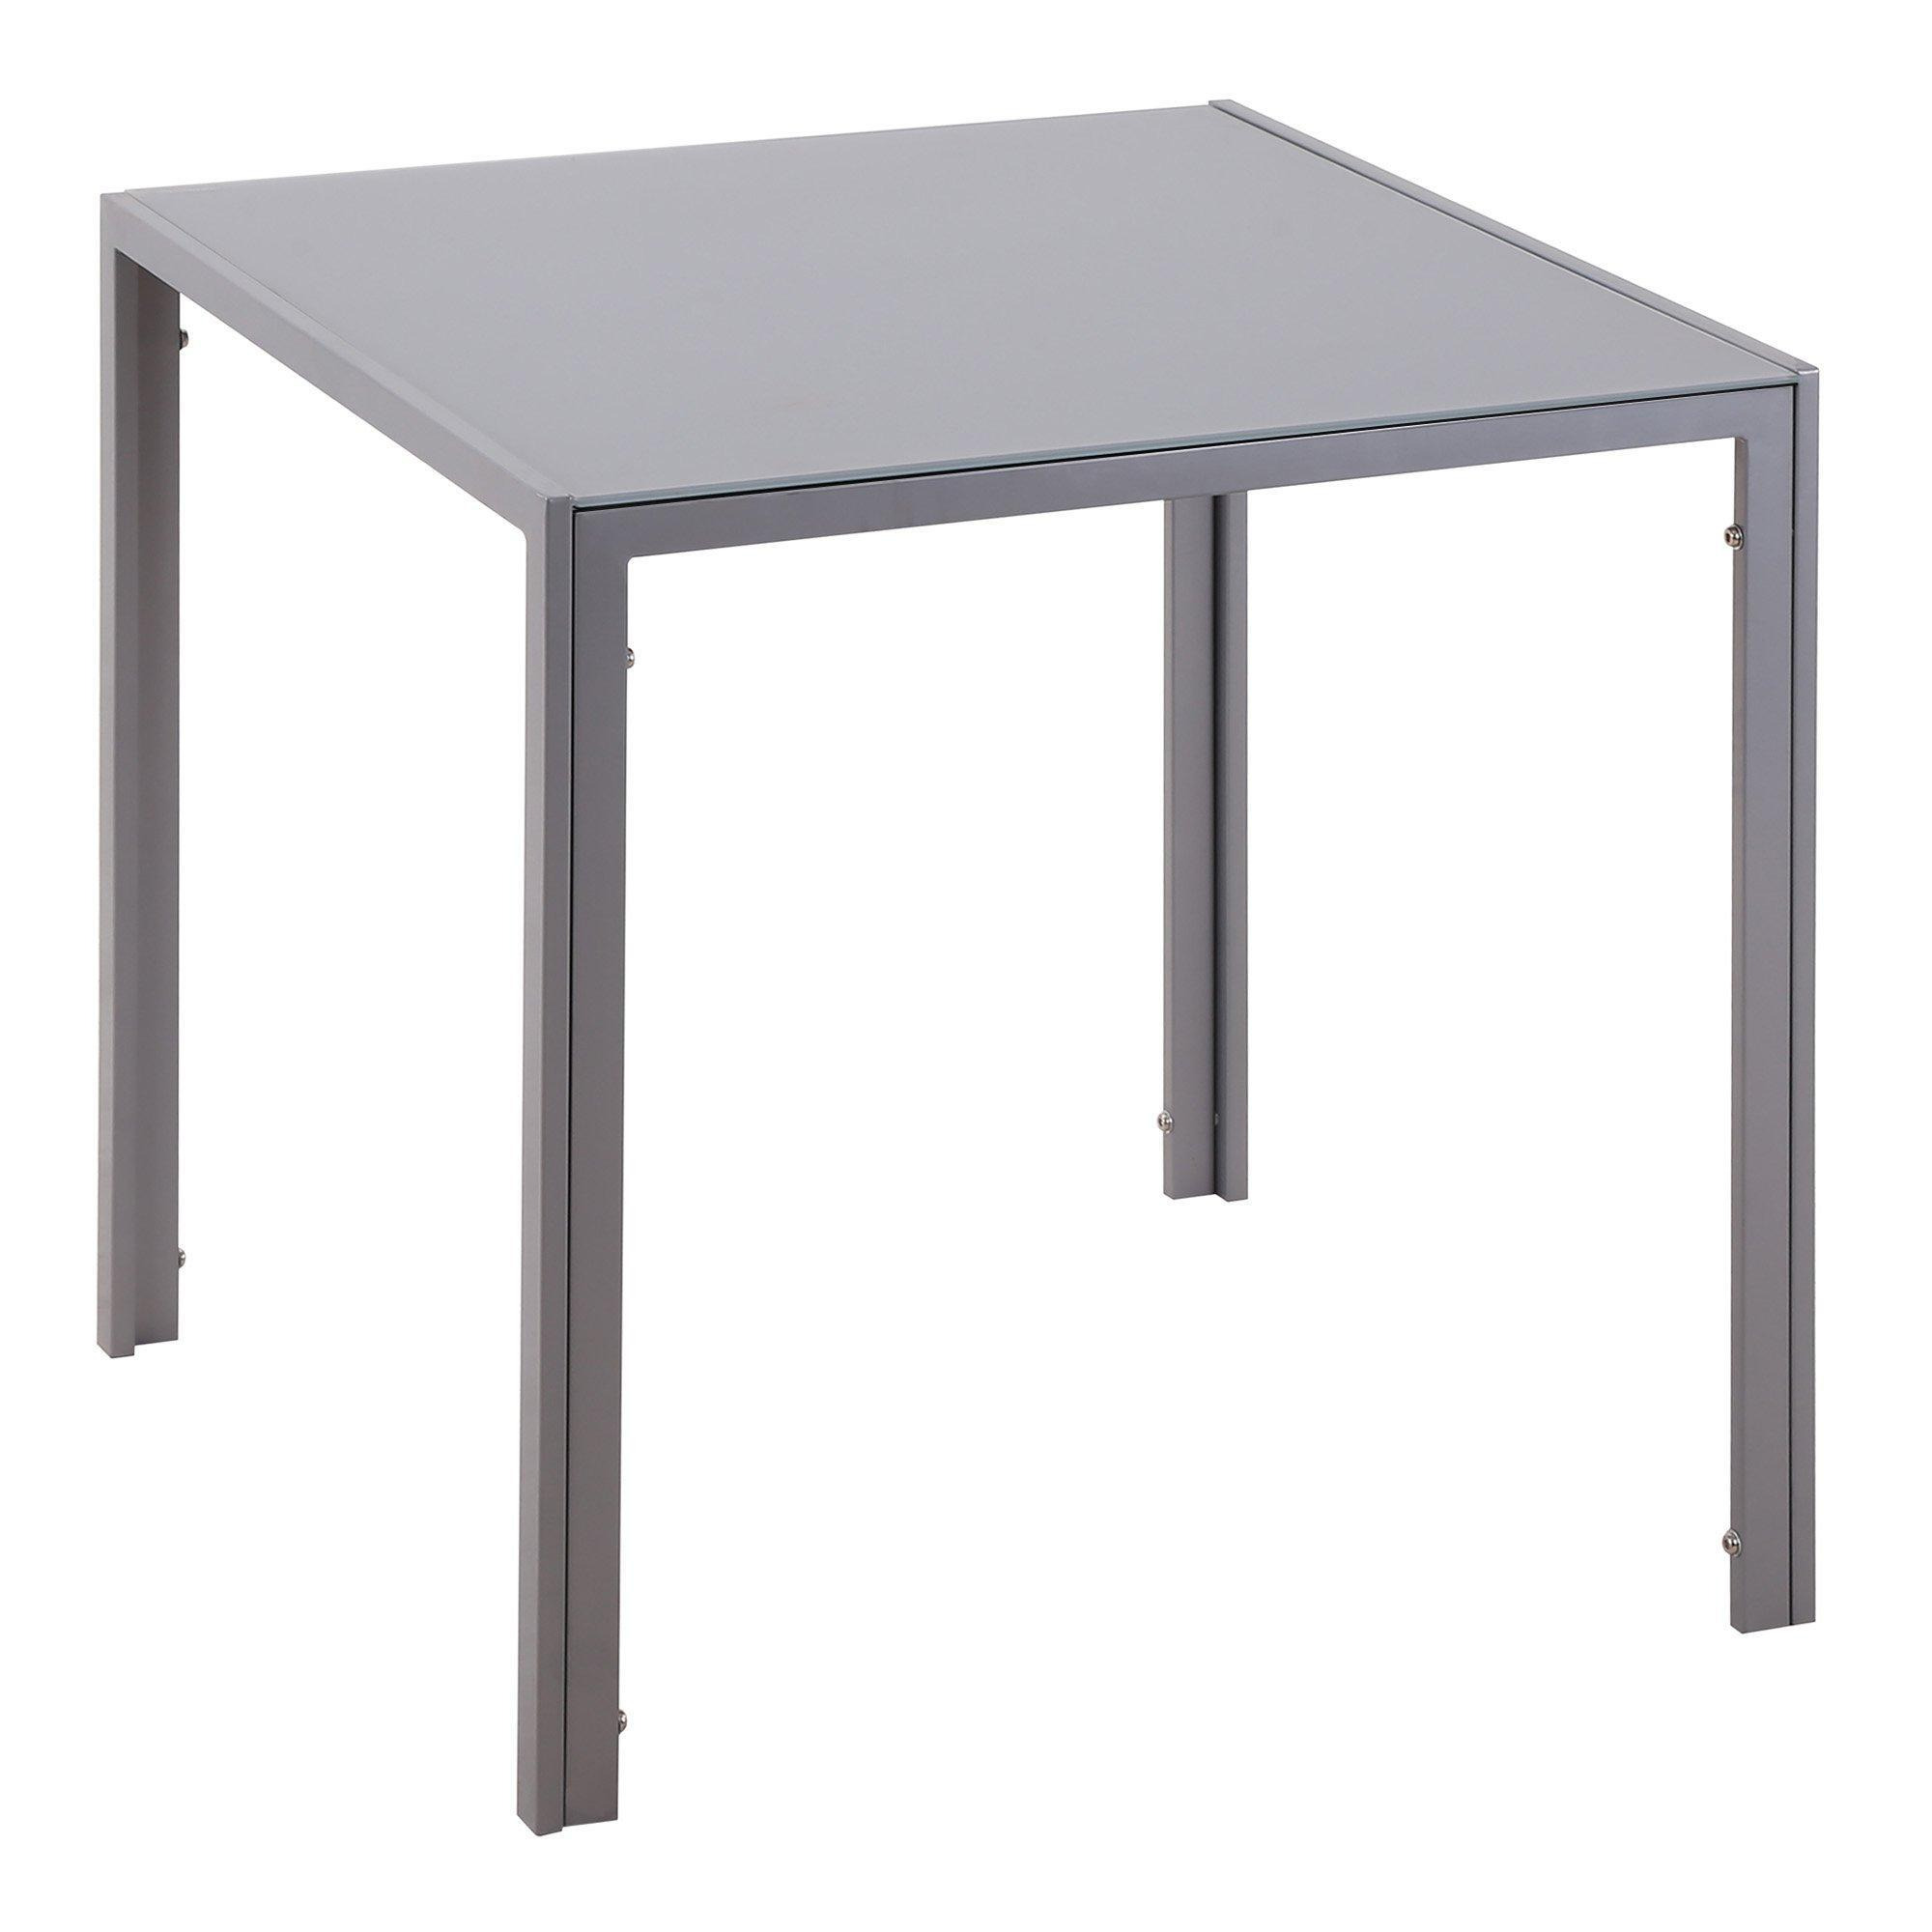 Modern Square Dining Table for 2-4 People with Glass Top - image 1